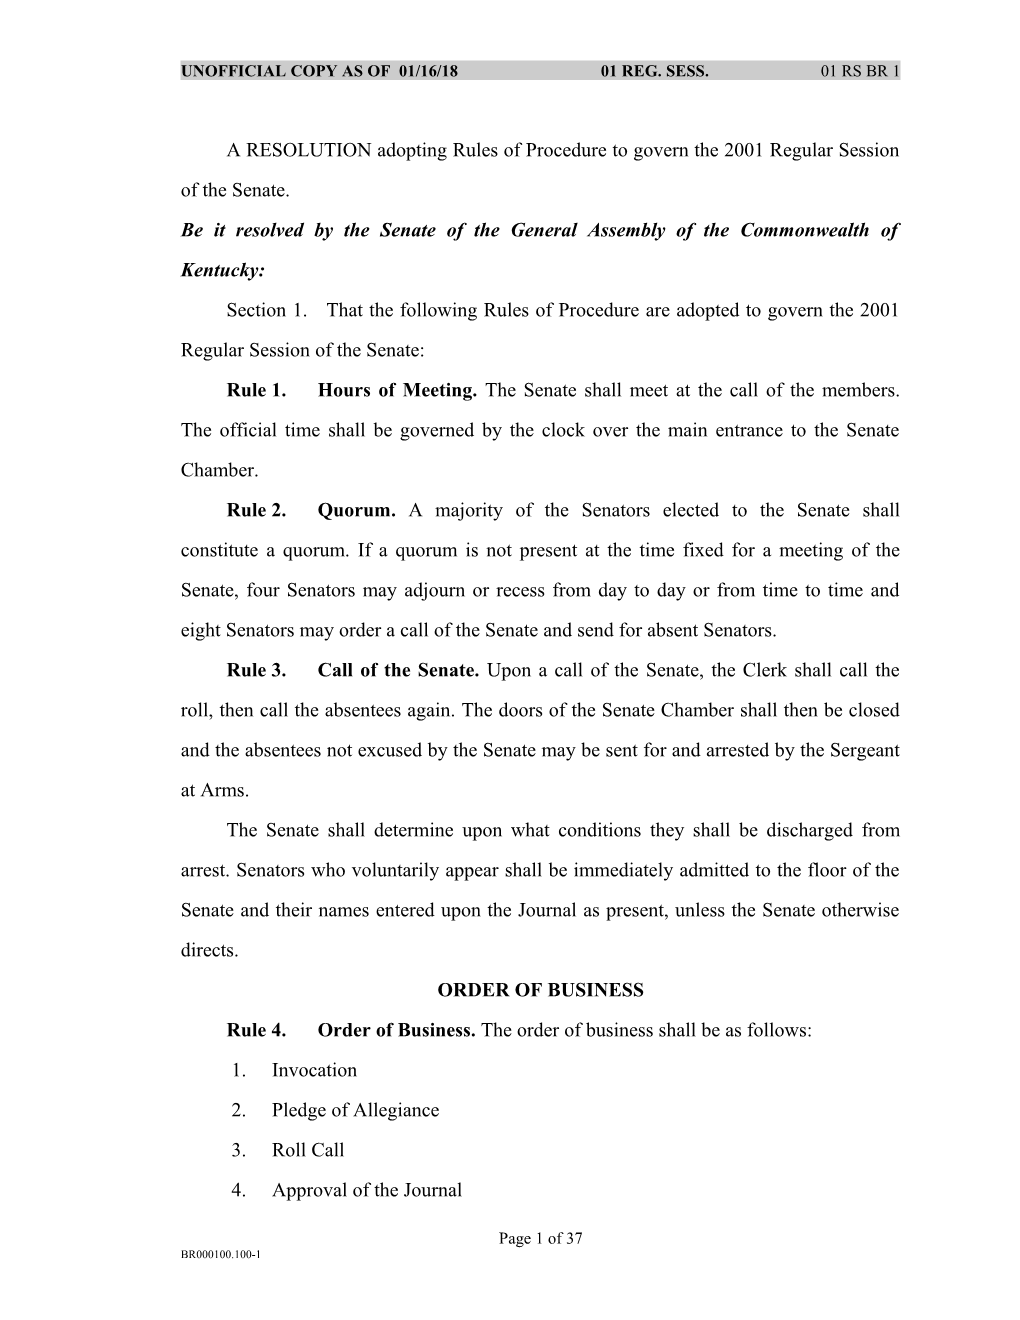 A RESOLUTION Adopting Rules of Procedure to Govern the 2001 Regular Session of the Senate